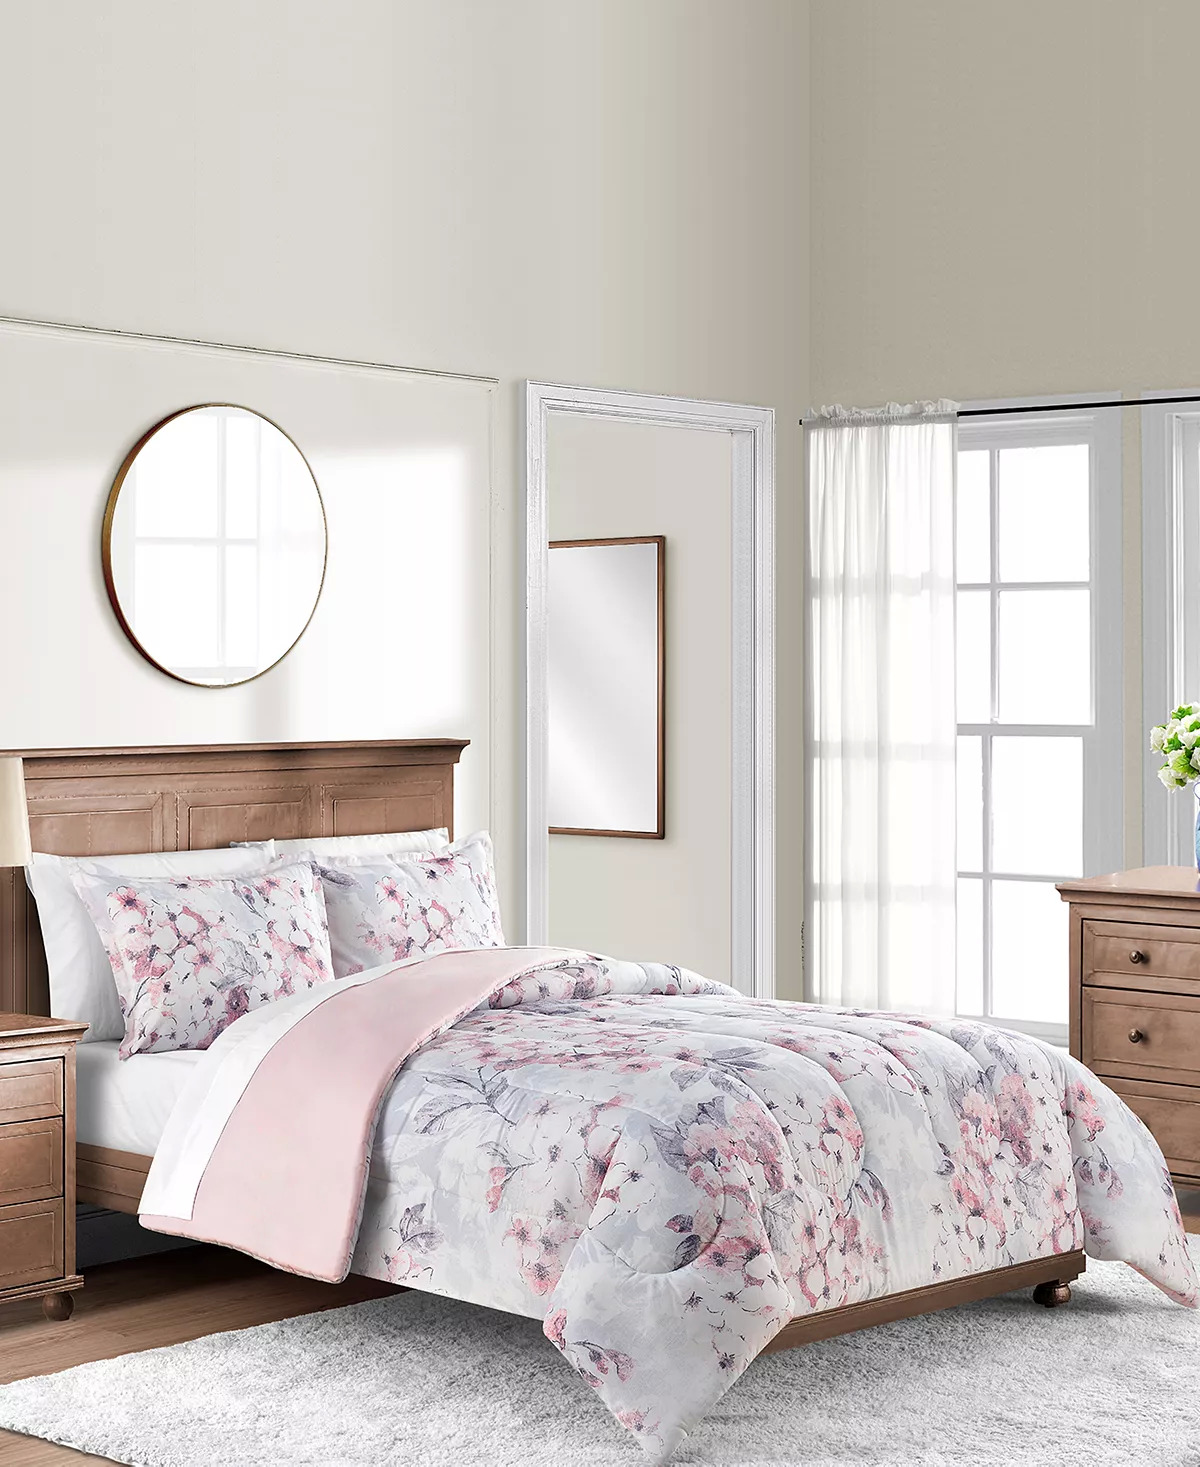 Macy's Comforter Sets (Various Sizes/Styles): 8-Pc from $35, 3-Pc $25 + Free Shipping on orders $25+